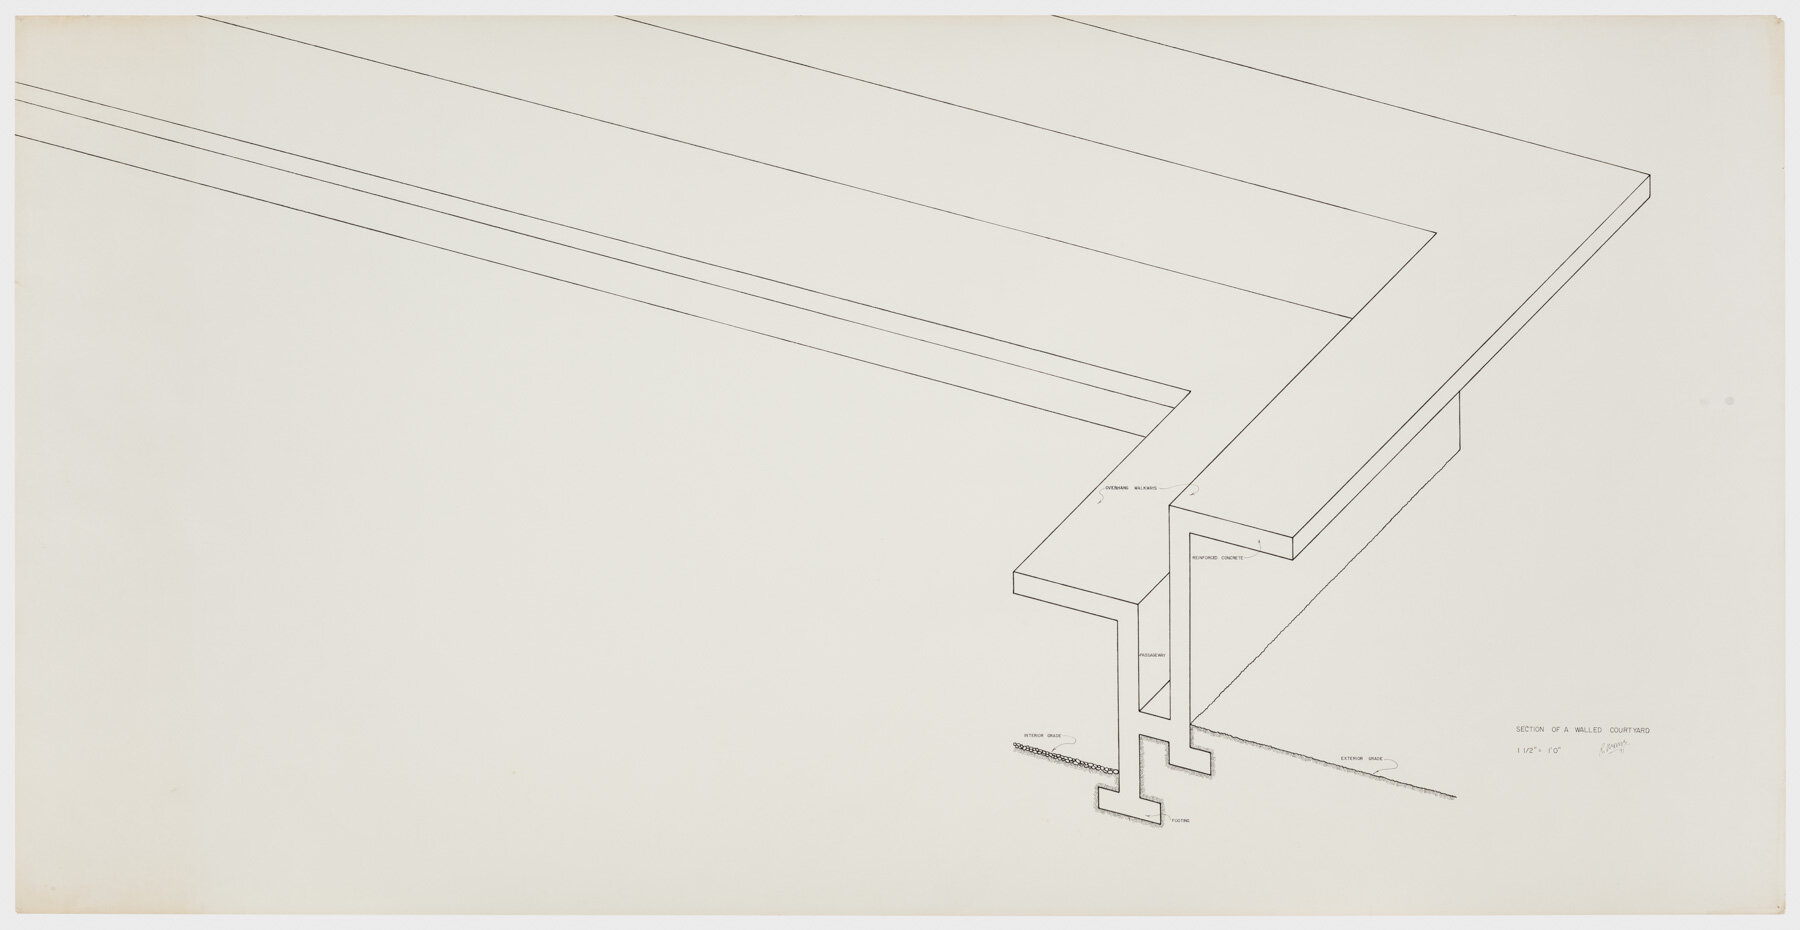  Robert Morris.  Section of a Walled Courtyard , 1971. Ink on paper,42 x 84 in. (107 x 213 cm). Courtesy of Hunter College, The City University of New York. © 2019 The Estate of Robert Morris / Artists Rights Society (ARS), New York. Photo: Stan Nart